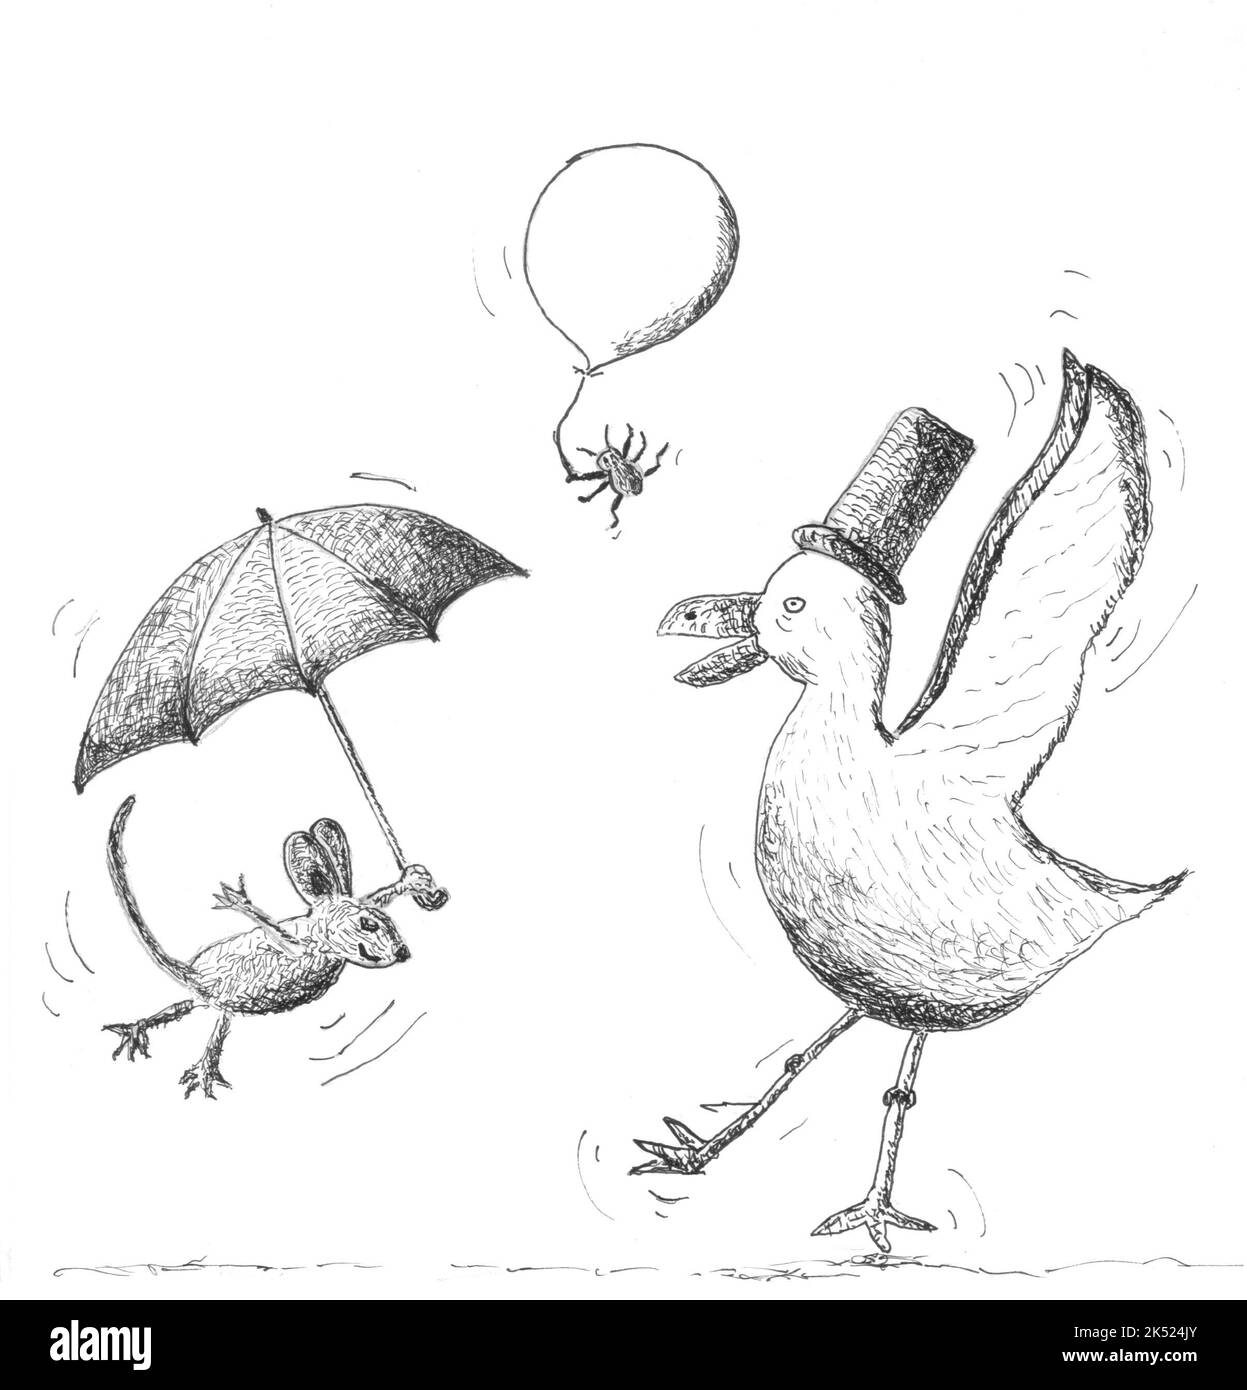 Surreal Illustration of a mouse being lifted by an umbrella & a seagull is dancing and a bug is being lifted by a ballon. Illustration by Nikki Attree Stock Photo